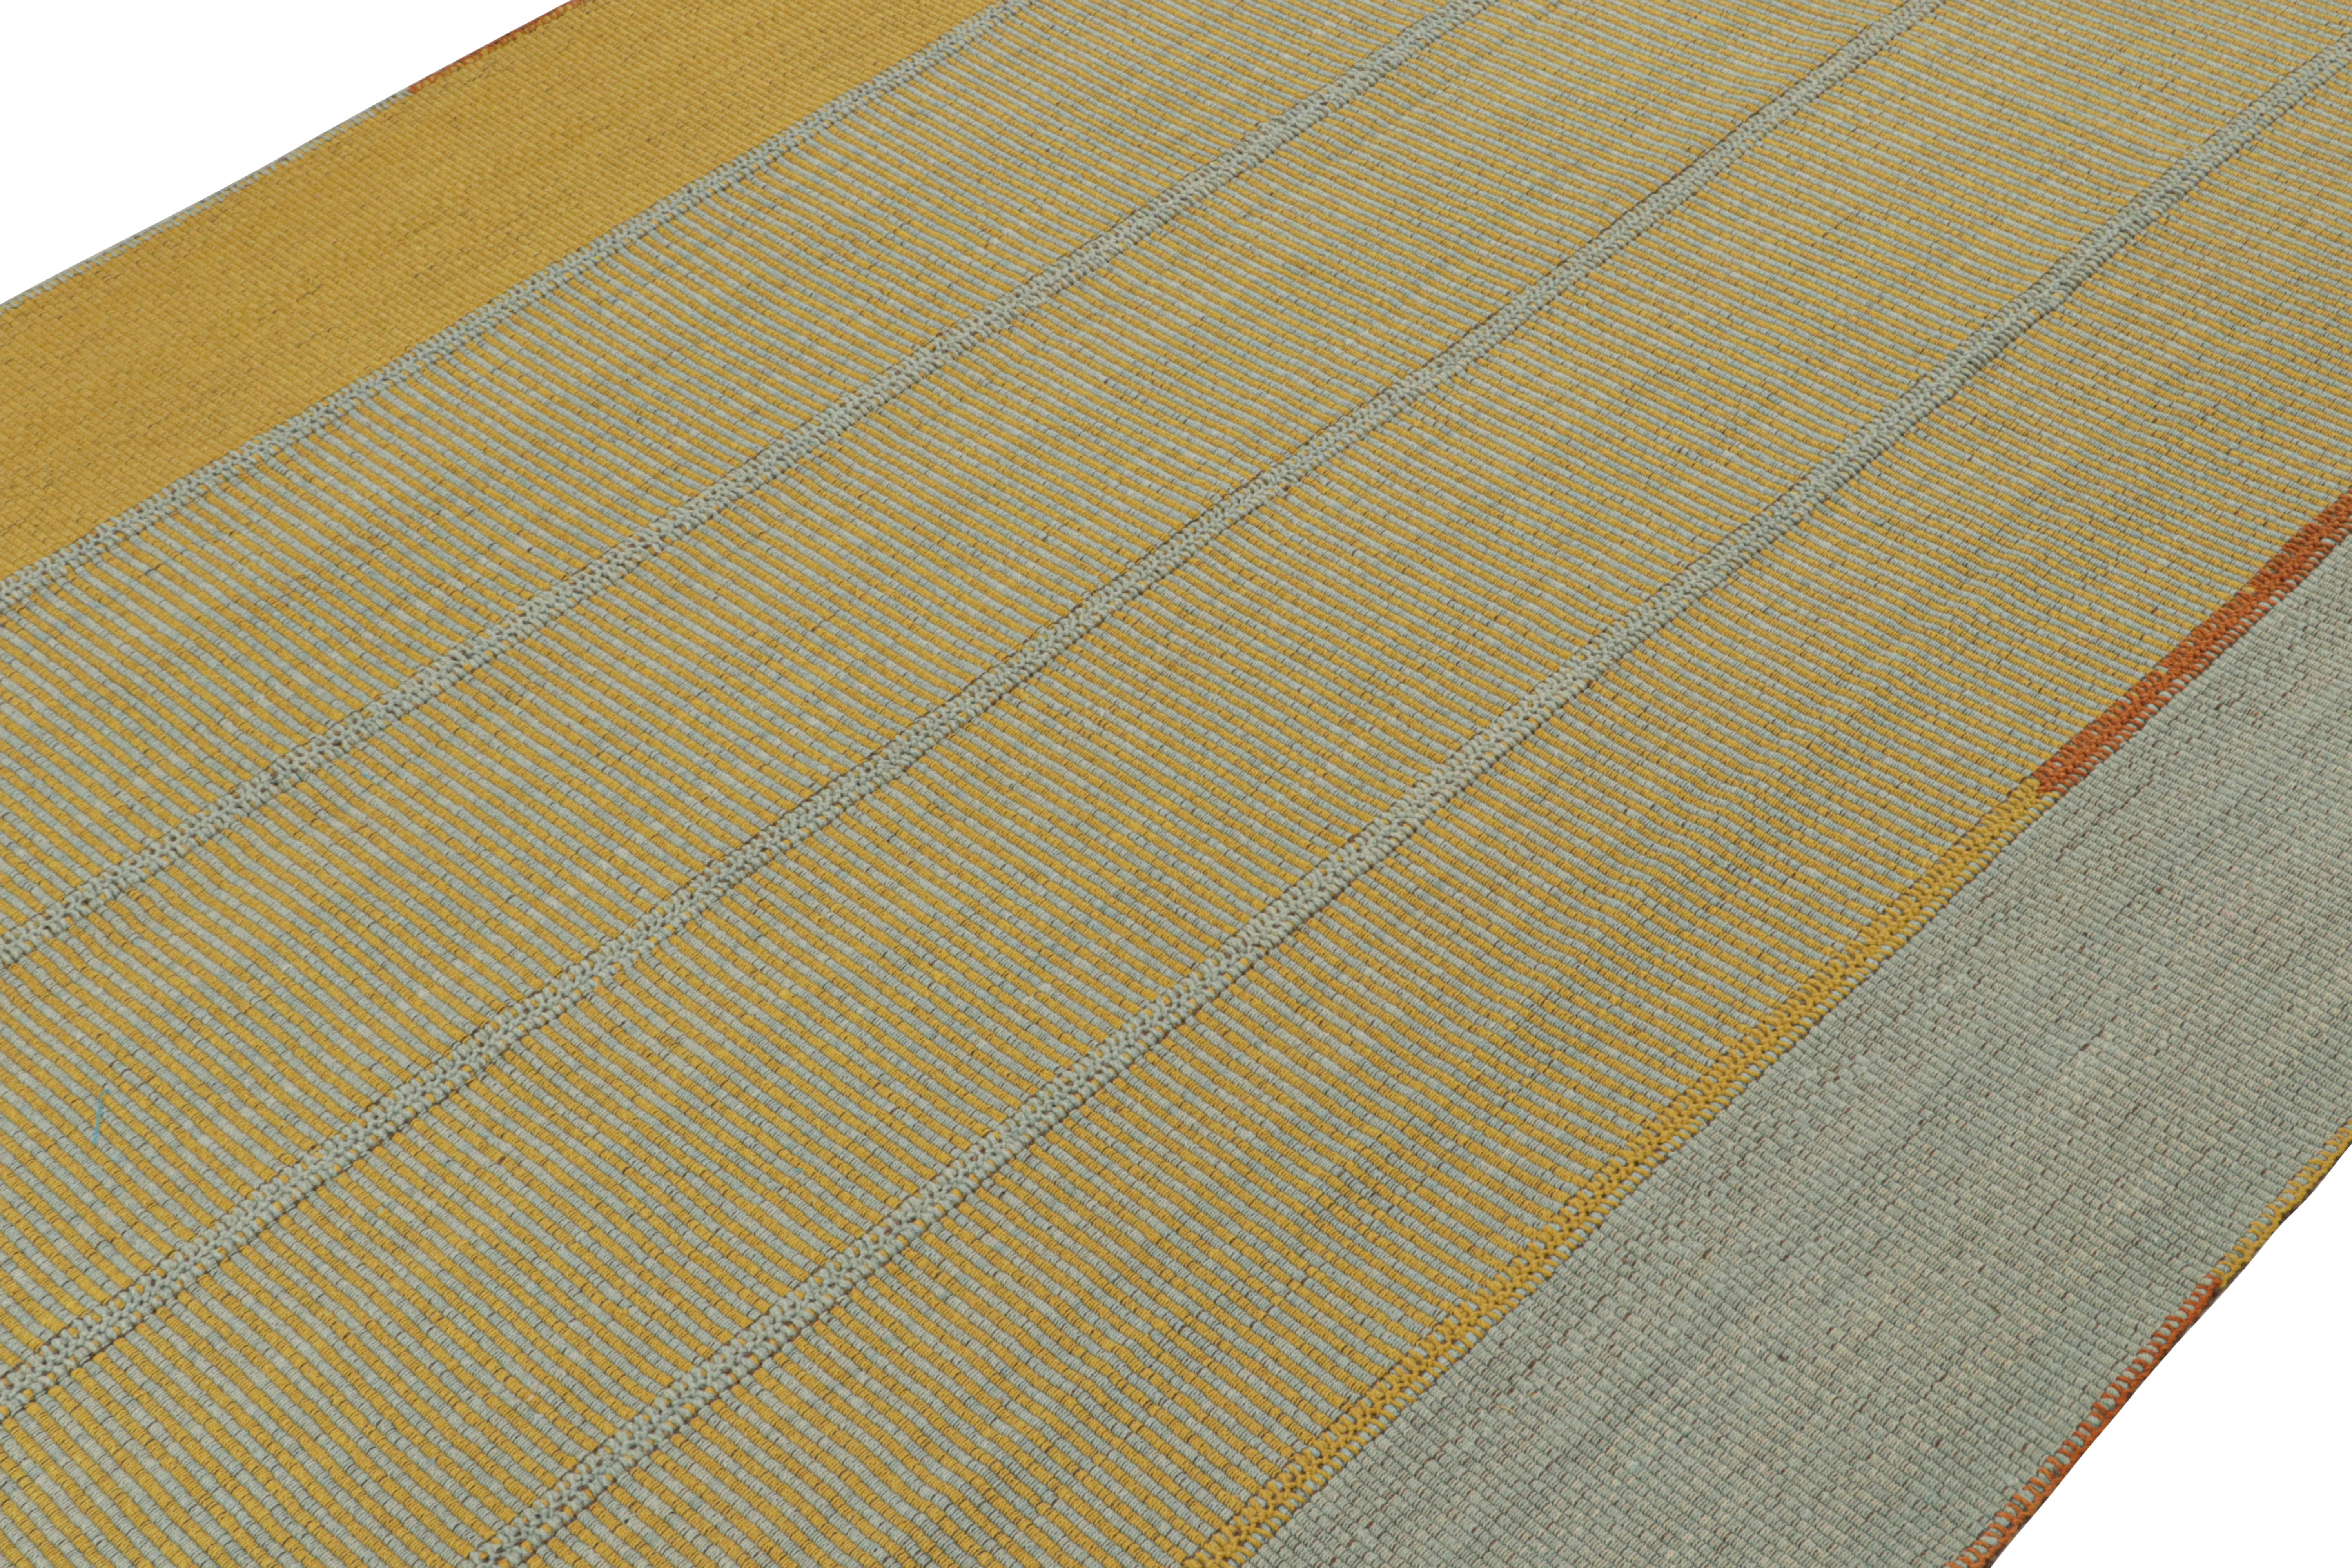 Handwoven in wool, a 9×12 Kilim from a bold new line of contemporary flatweaves by Rug & Kilim.

On the Design:

Connoting a modern take on classic panel-weaving, our latest “Rez Kilim” enjoys light blue and gold stripes, with a single orange accent